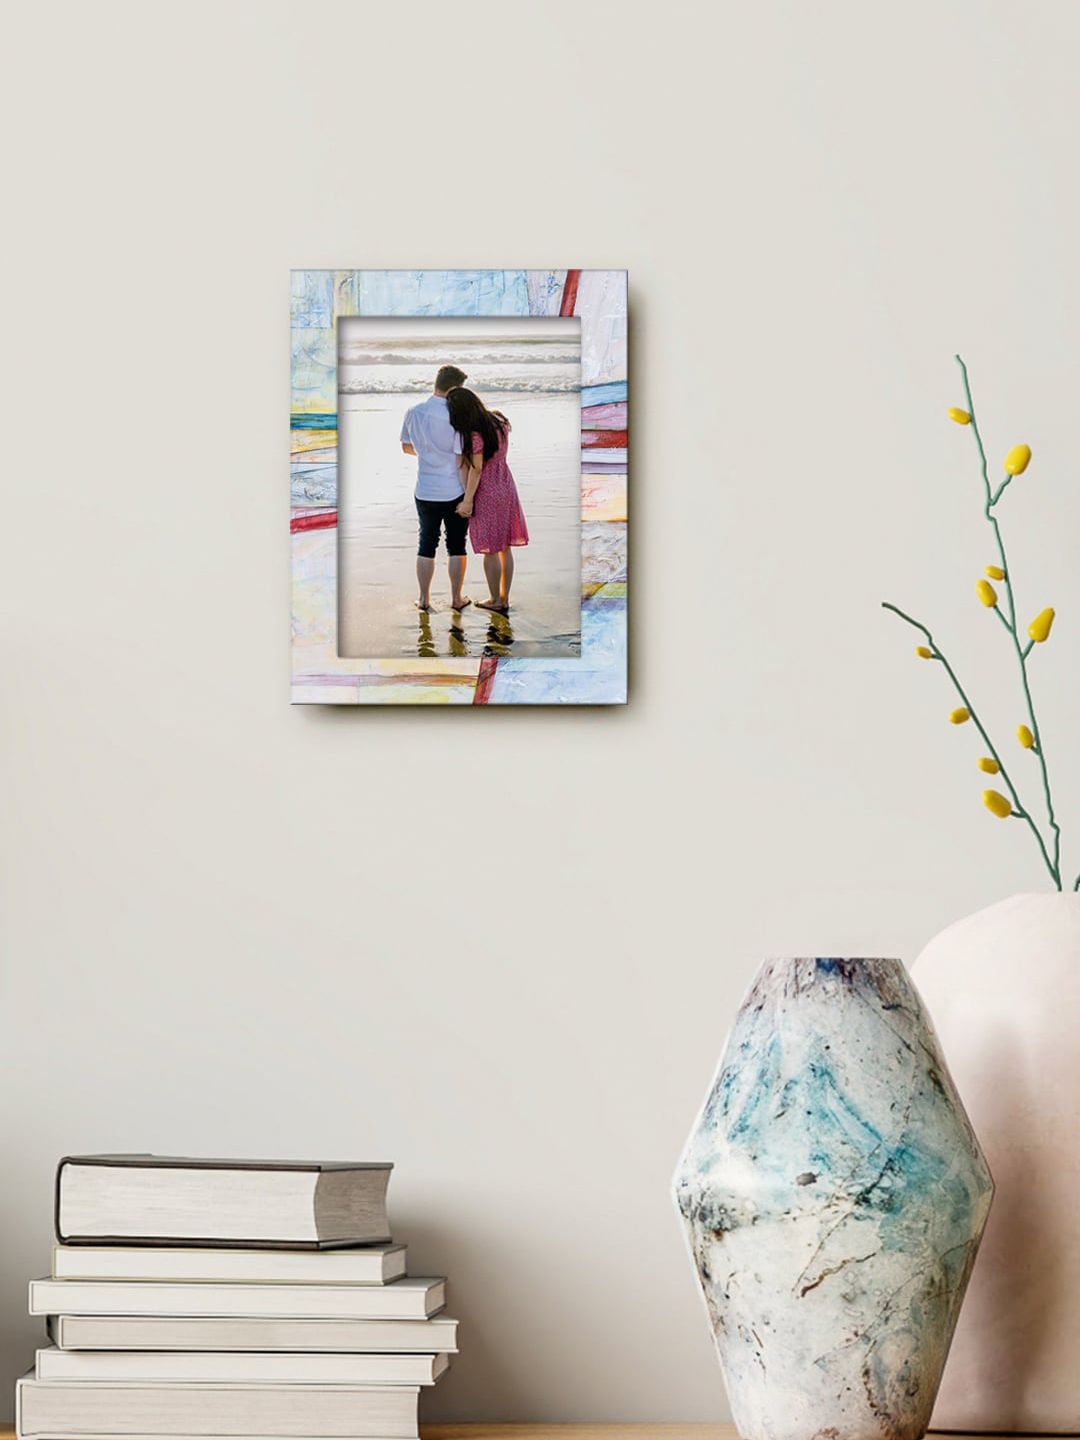 999Store Multicolor Printed MDF Wall Photo Frame Price in India